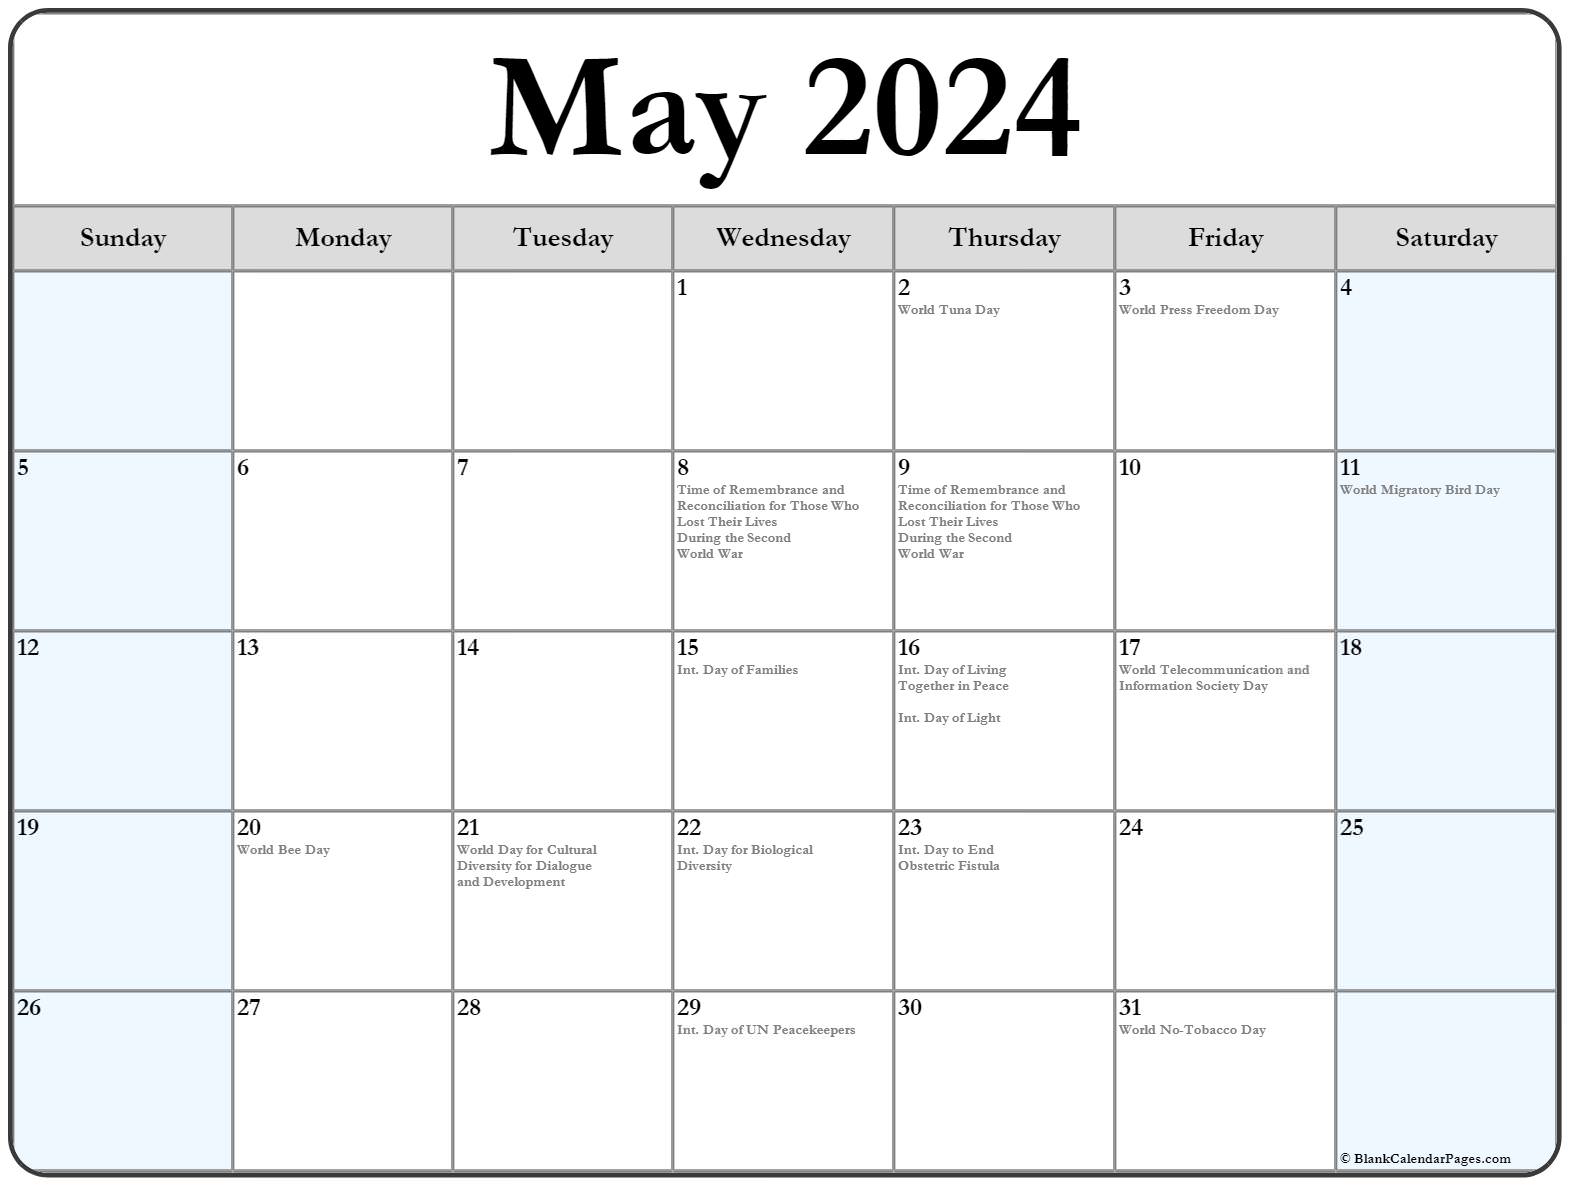 Collection of May 2021 calendars with holidays